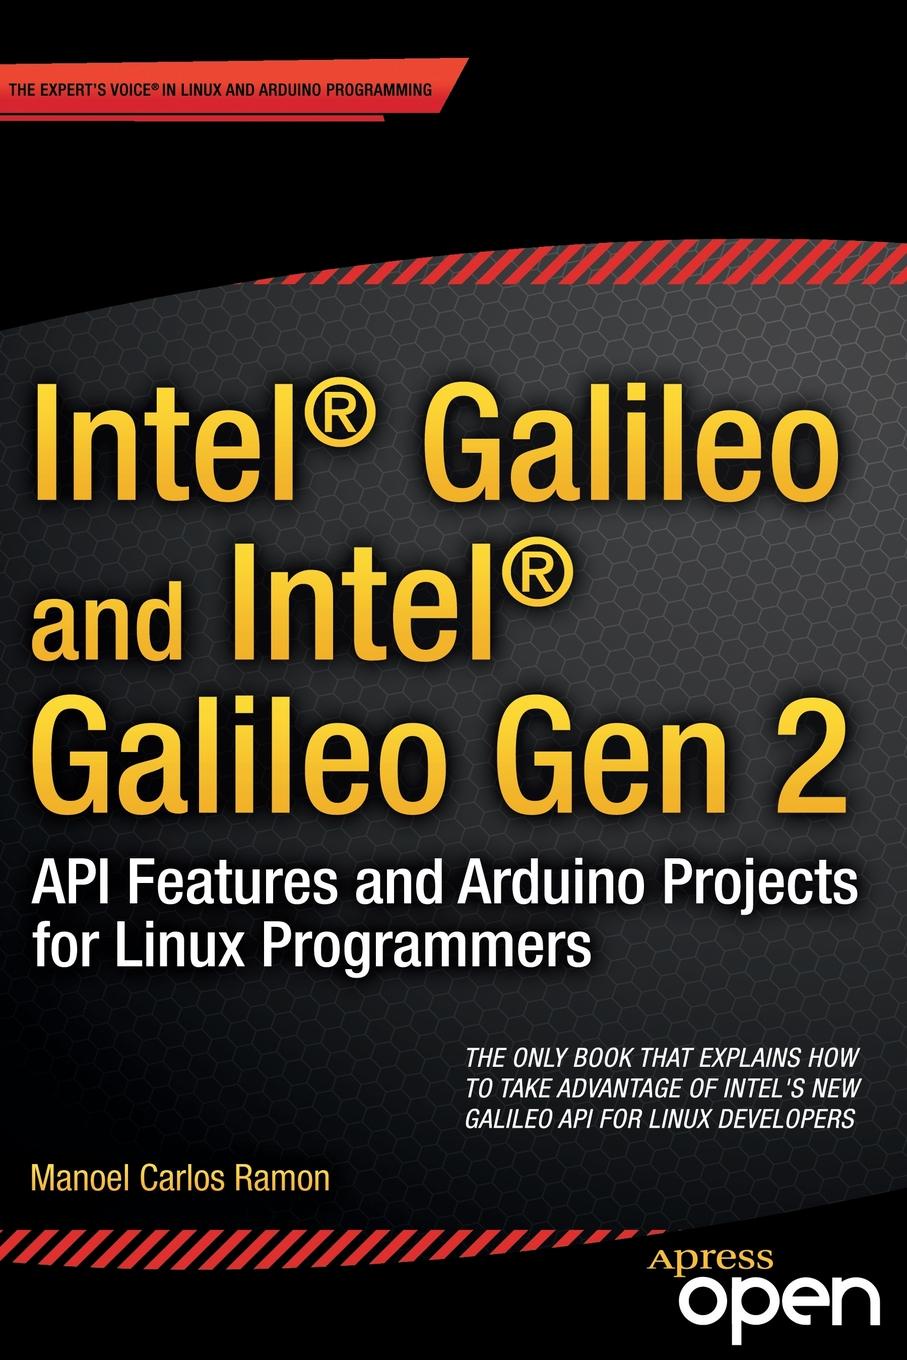 Intel Galileo and Intel Galileo Gen 2. API Features and Arduino Projects for Linux Programmers